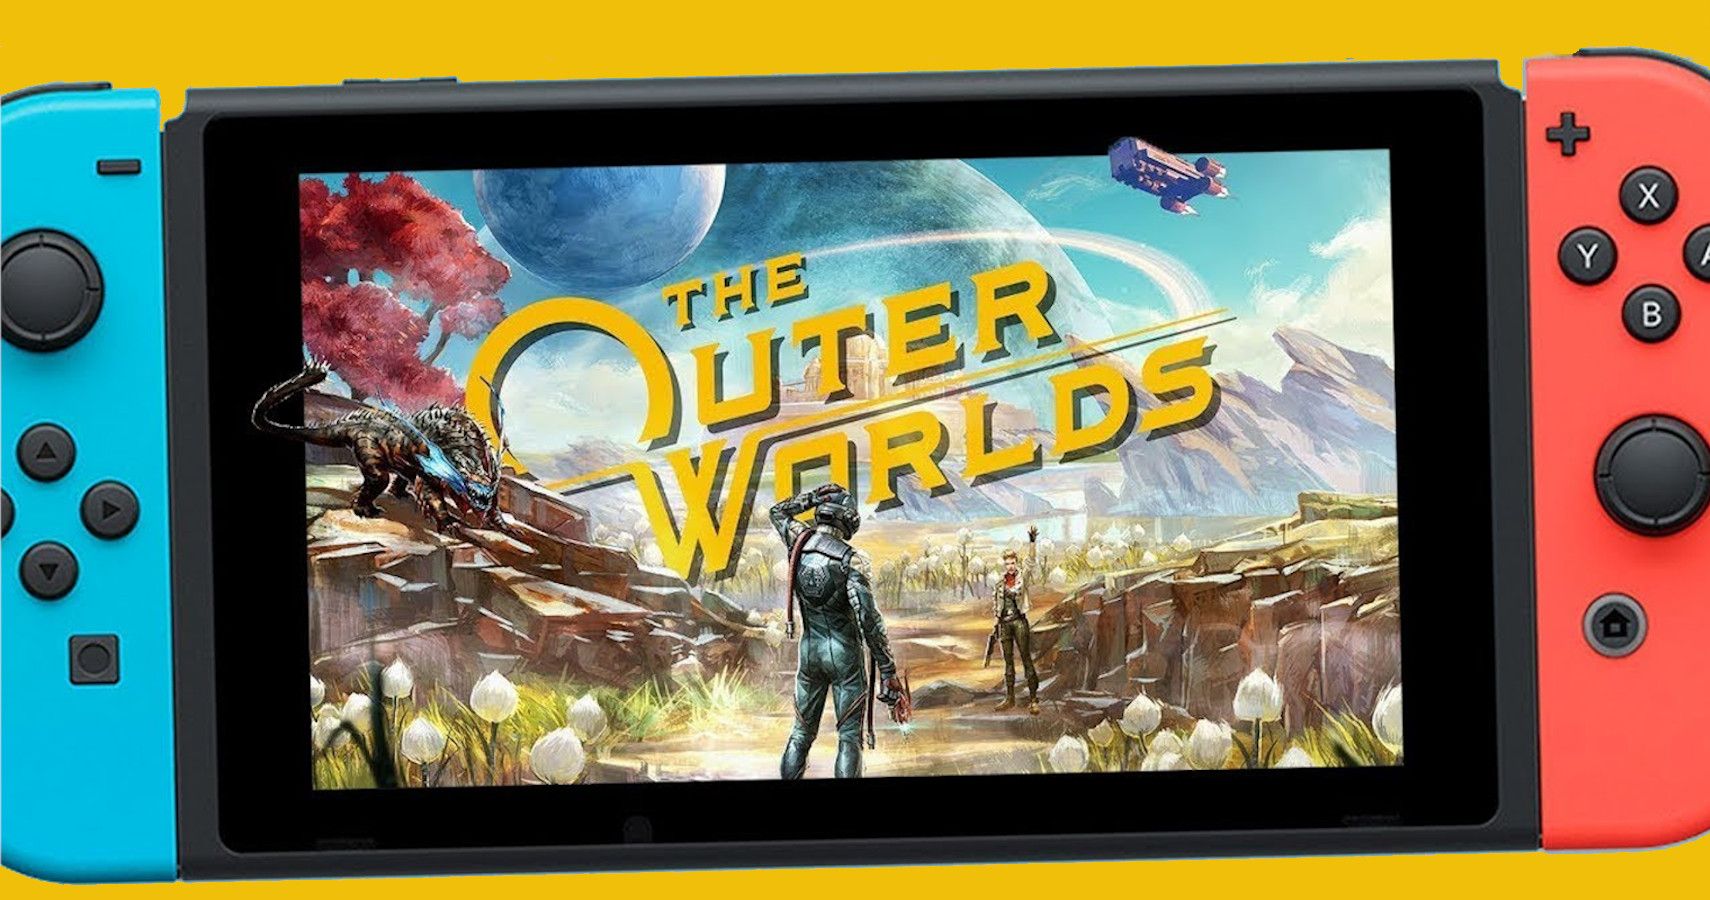 outer worlds switch physical cartridge